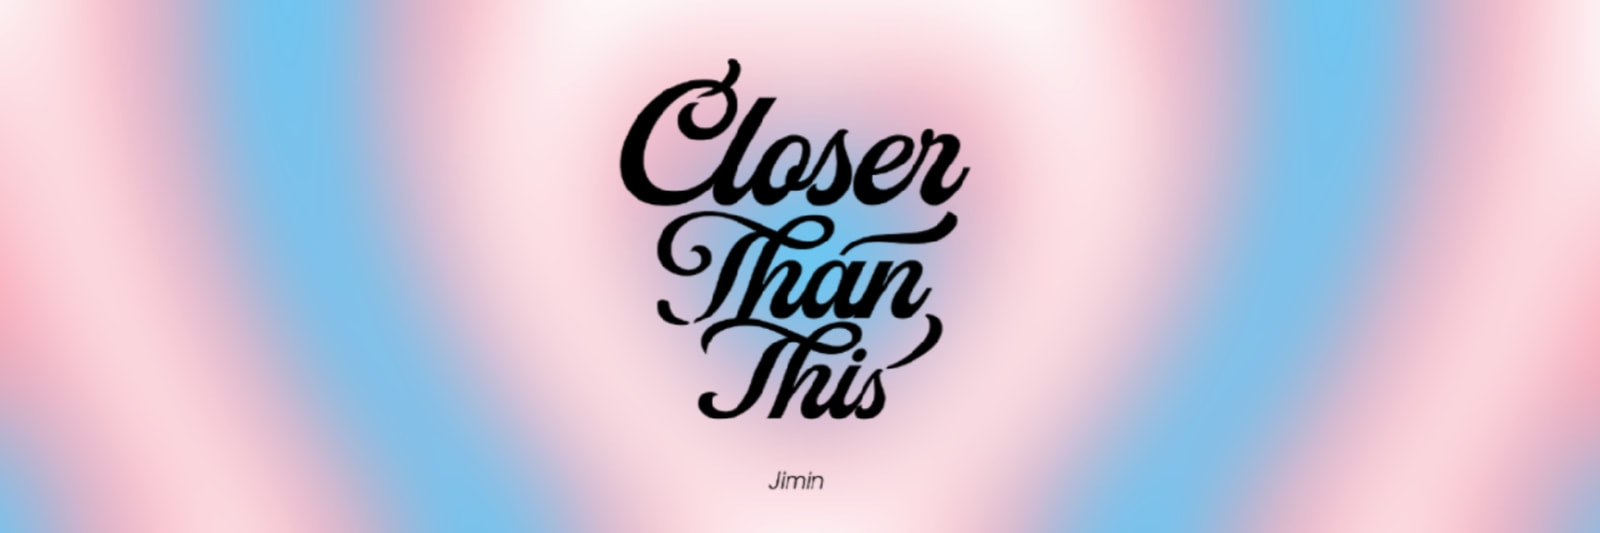 twitter header of the Closer Than This text in black with radiating trans flag colors starting from the center in a vague blurred heart shape